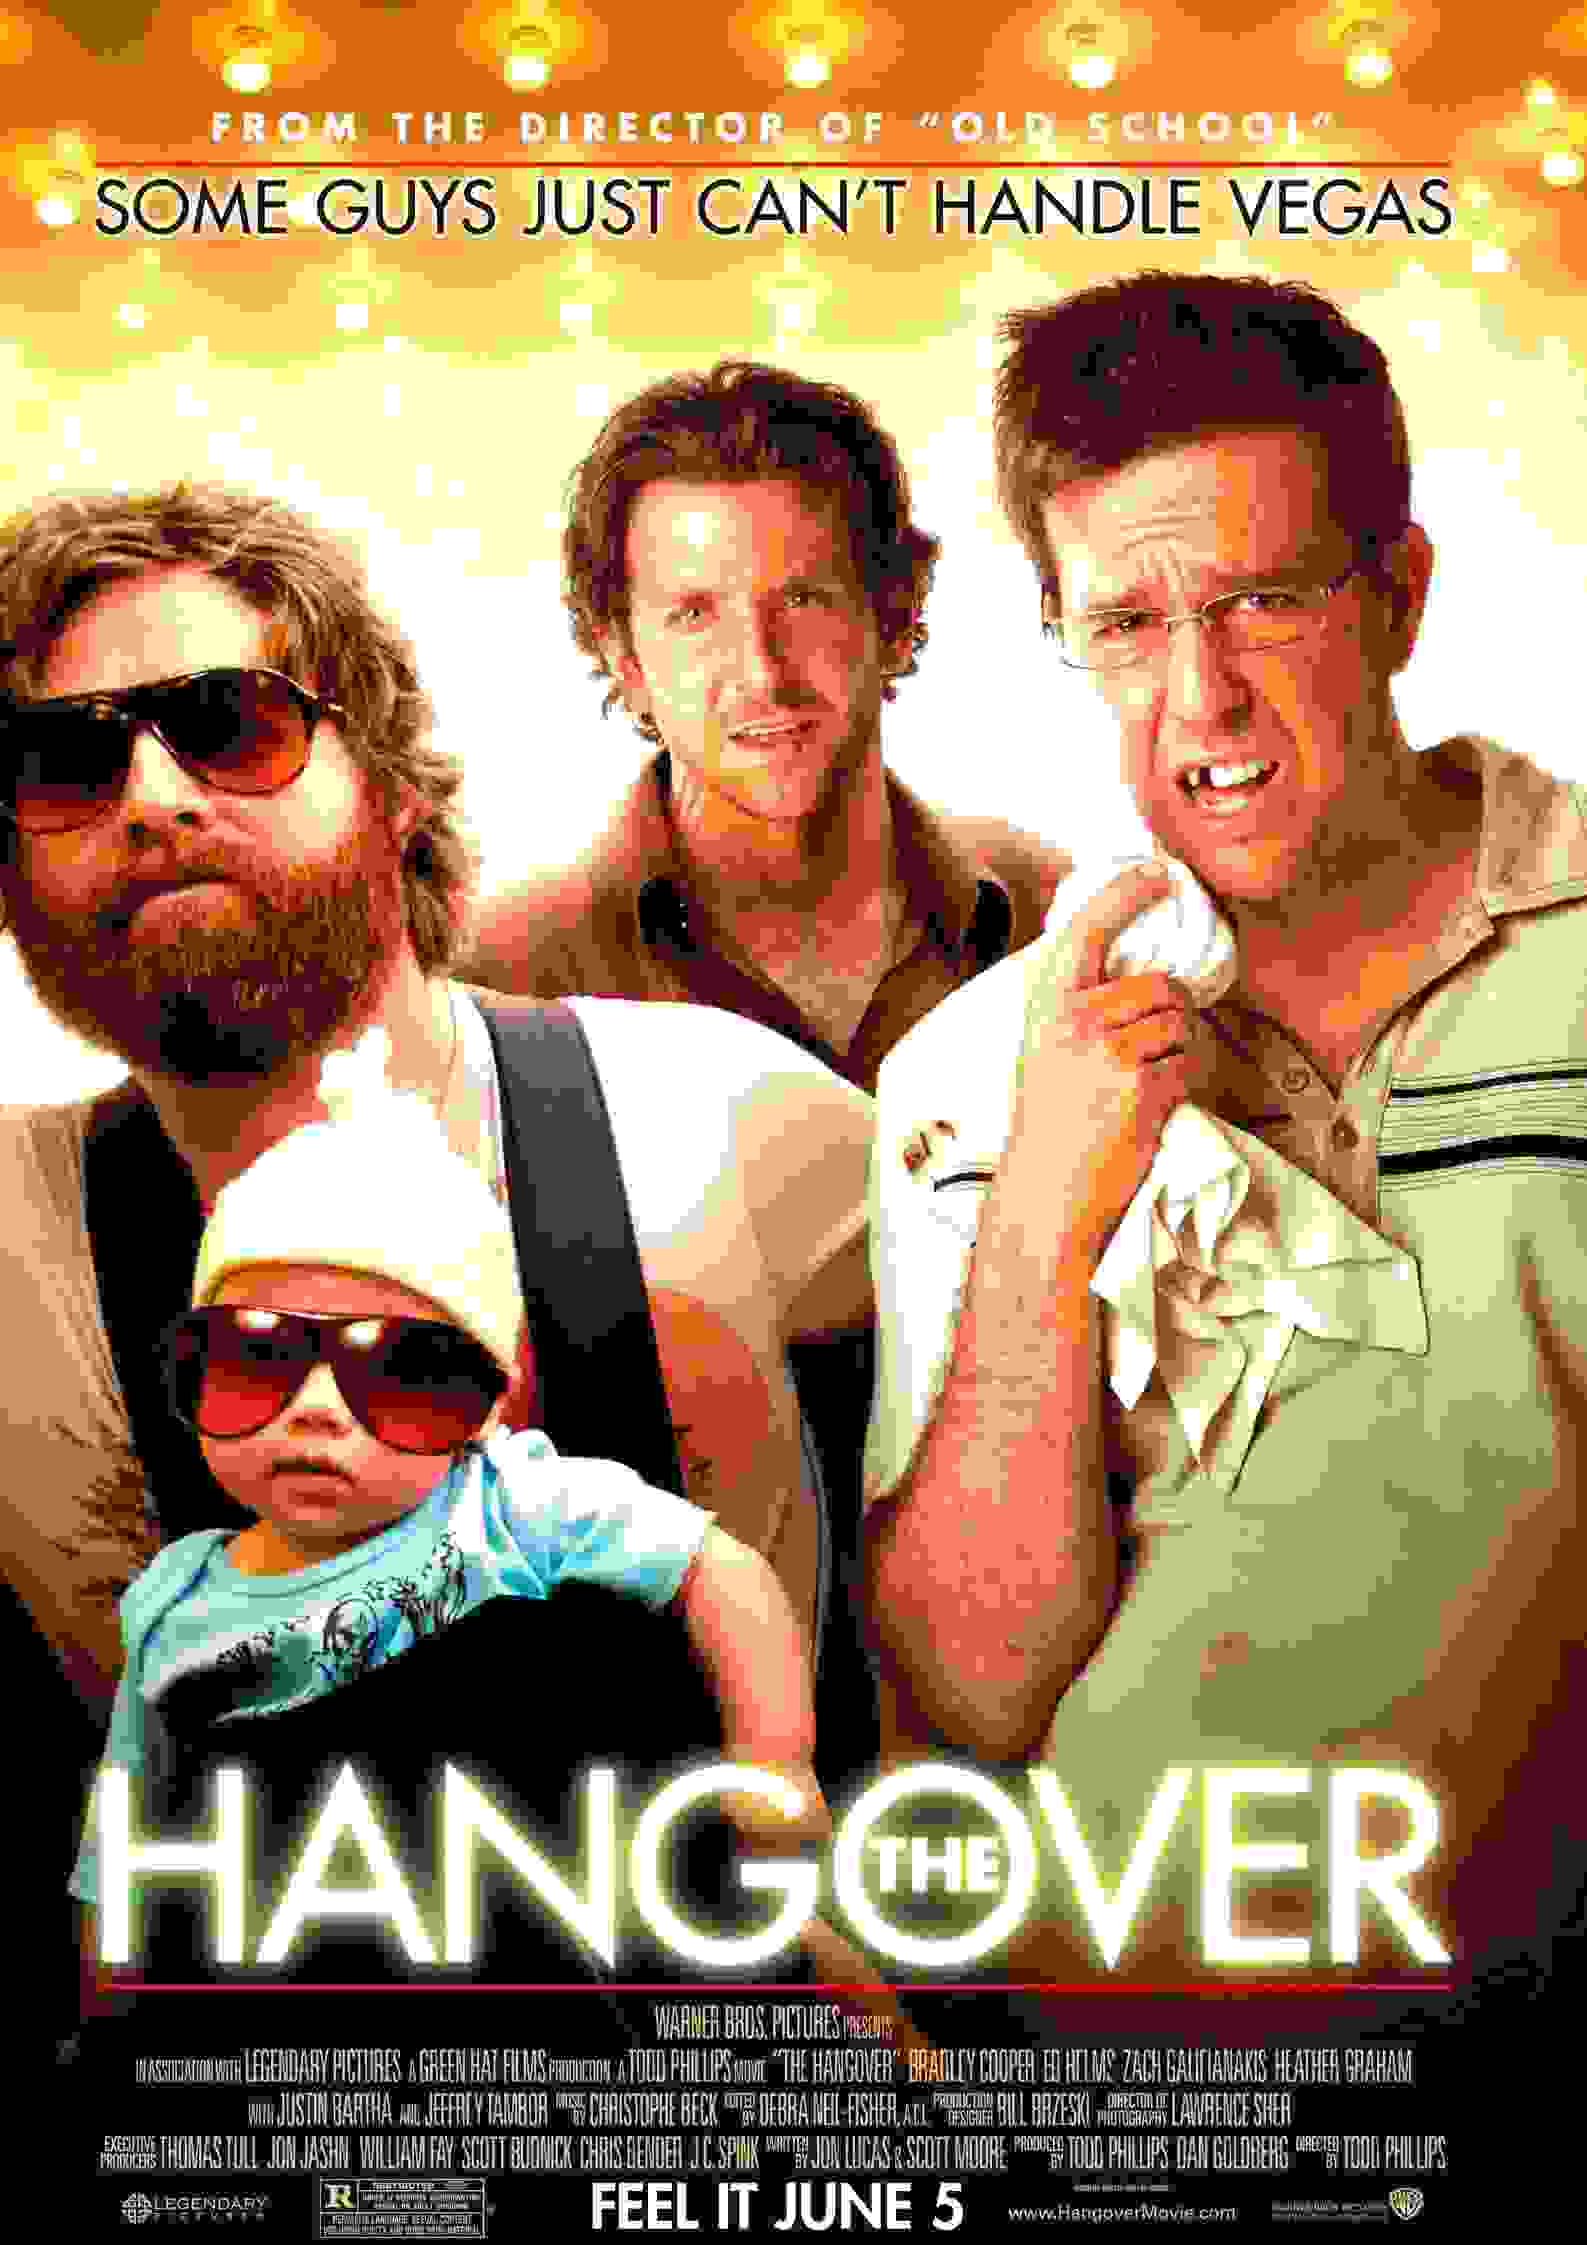 The Hangover Parents guide and Age Rating | 2009